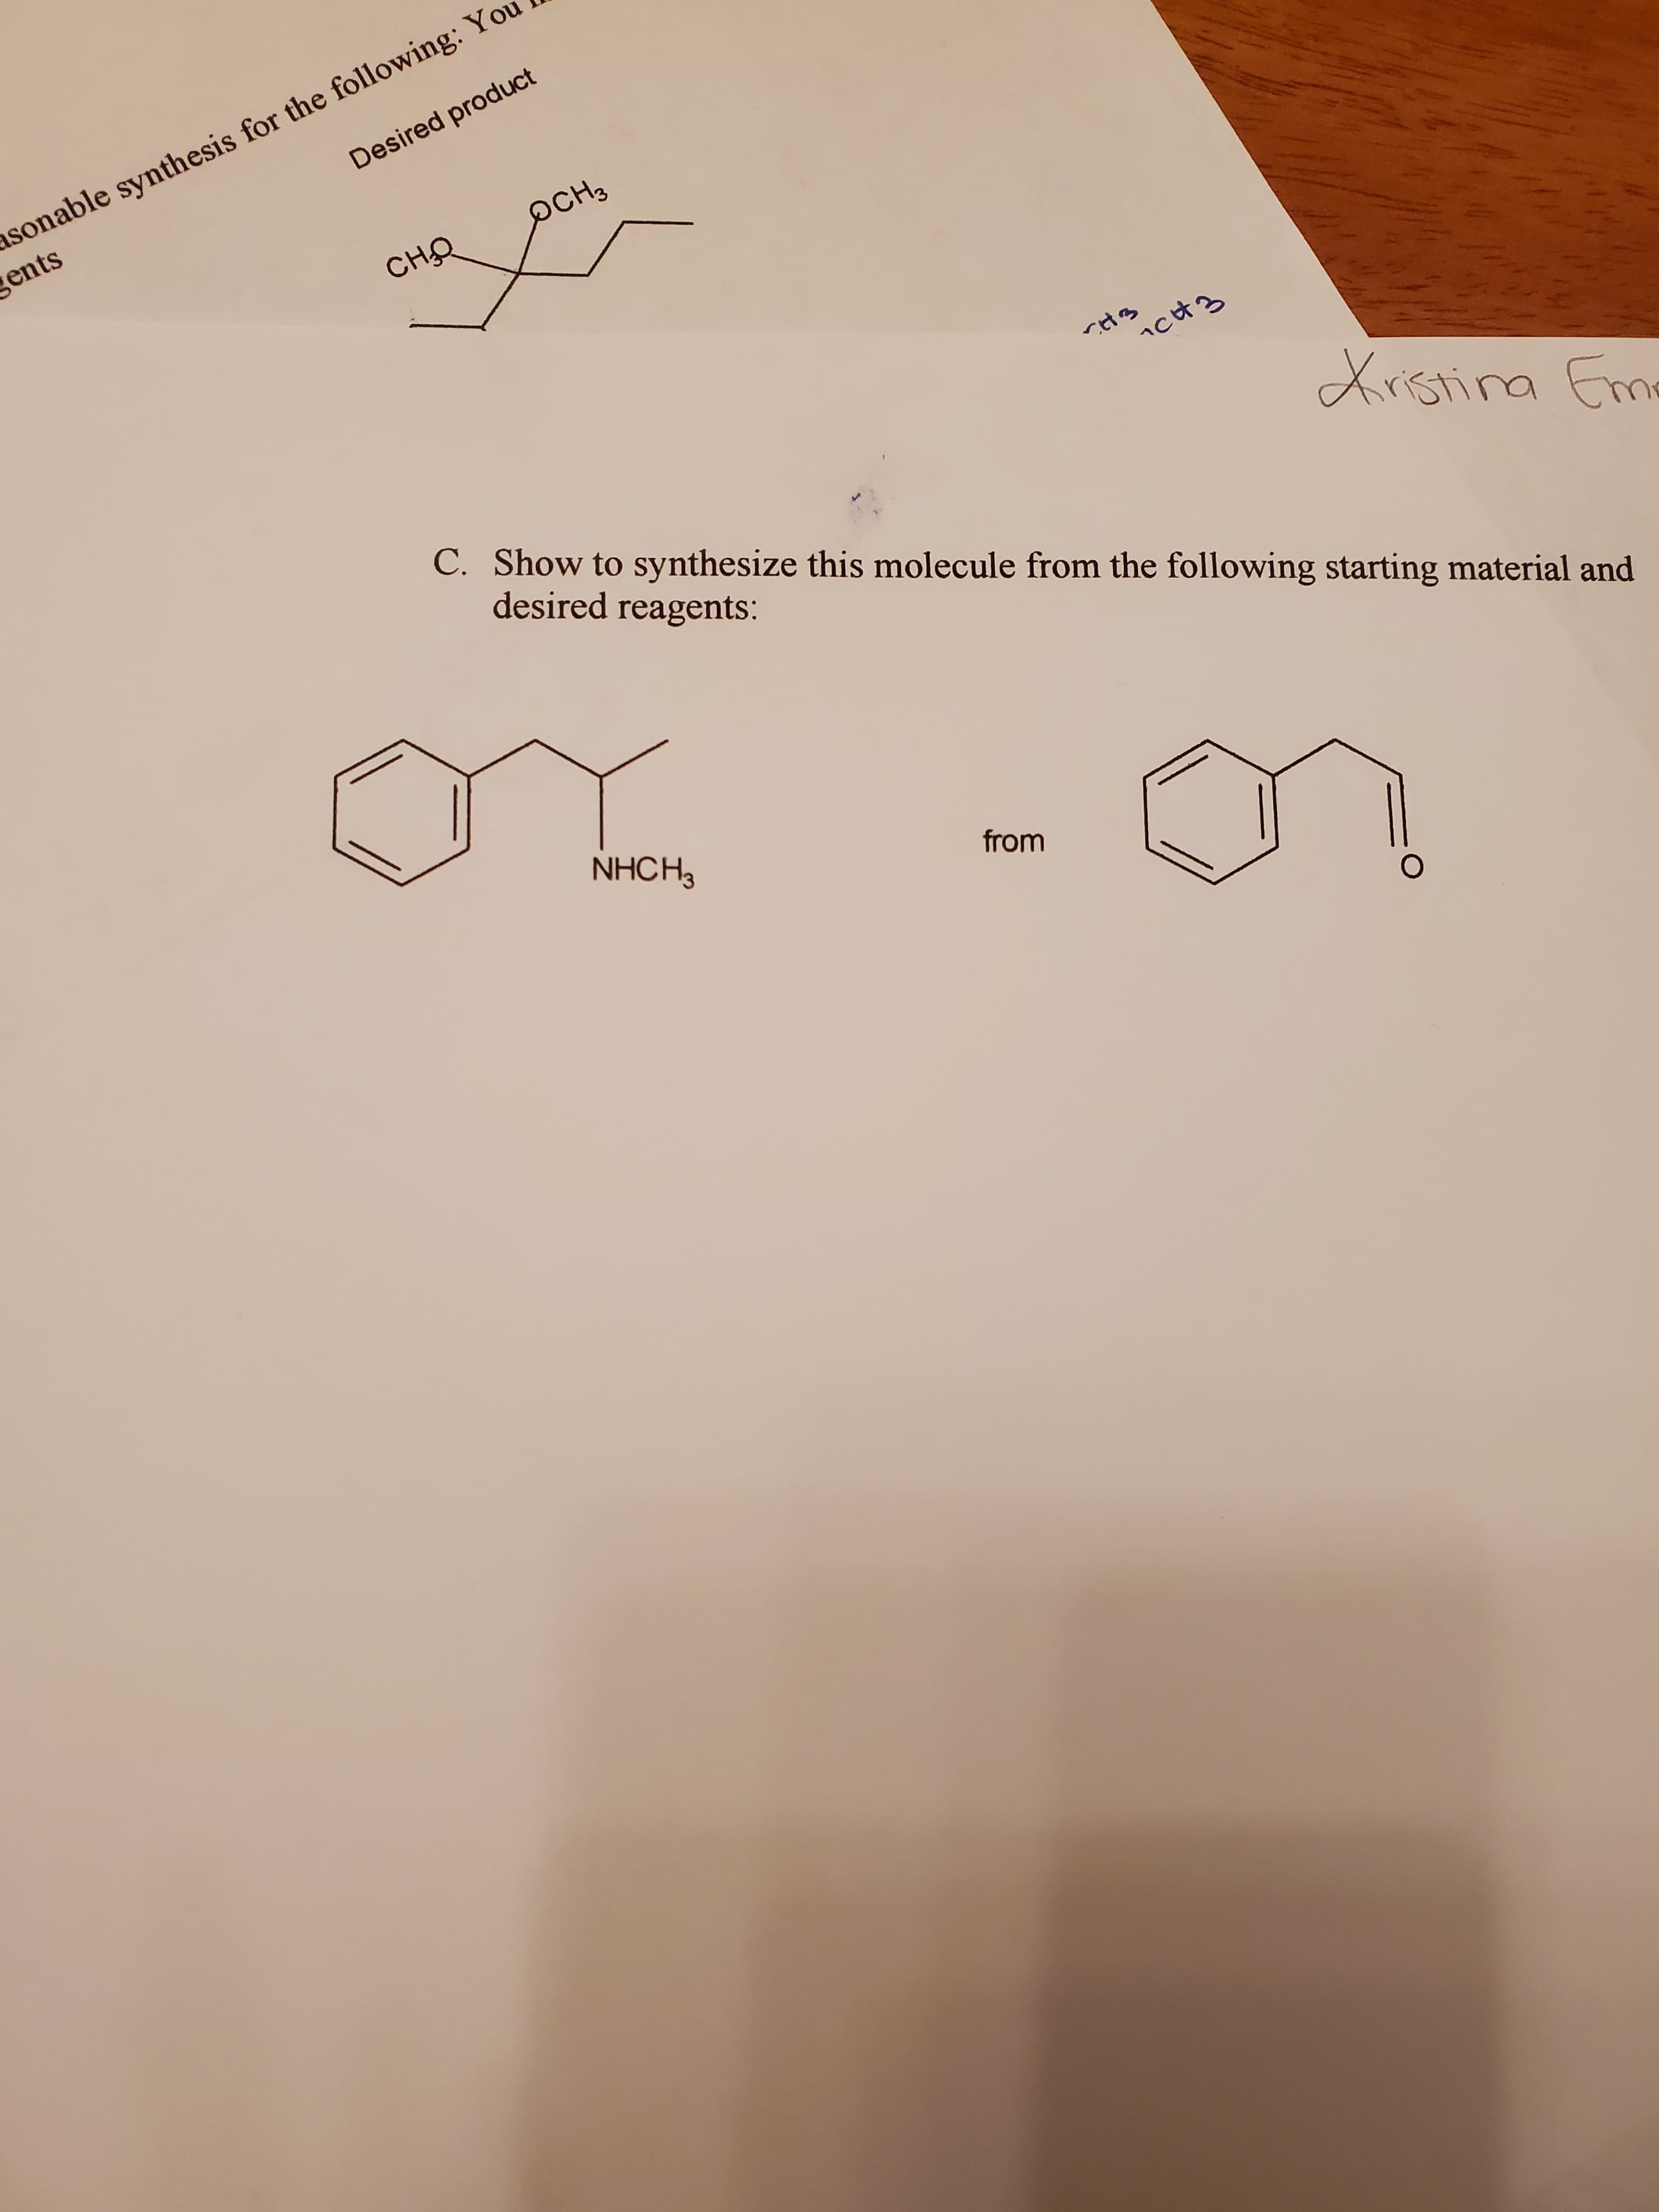 asonable synthesis for the following: Yo
gents
Desired product
оснз
сно
icH3
Xrstina Eme
C. Show to synthesize this molecule from the following starting material and
desired reagents:
or
NHCH3
from
